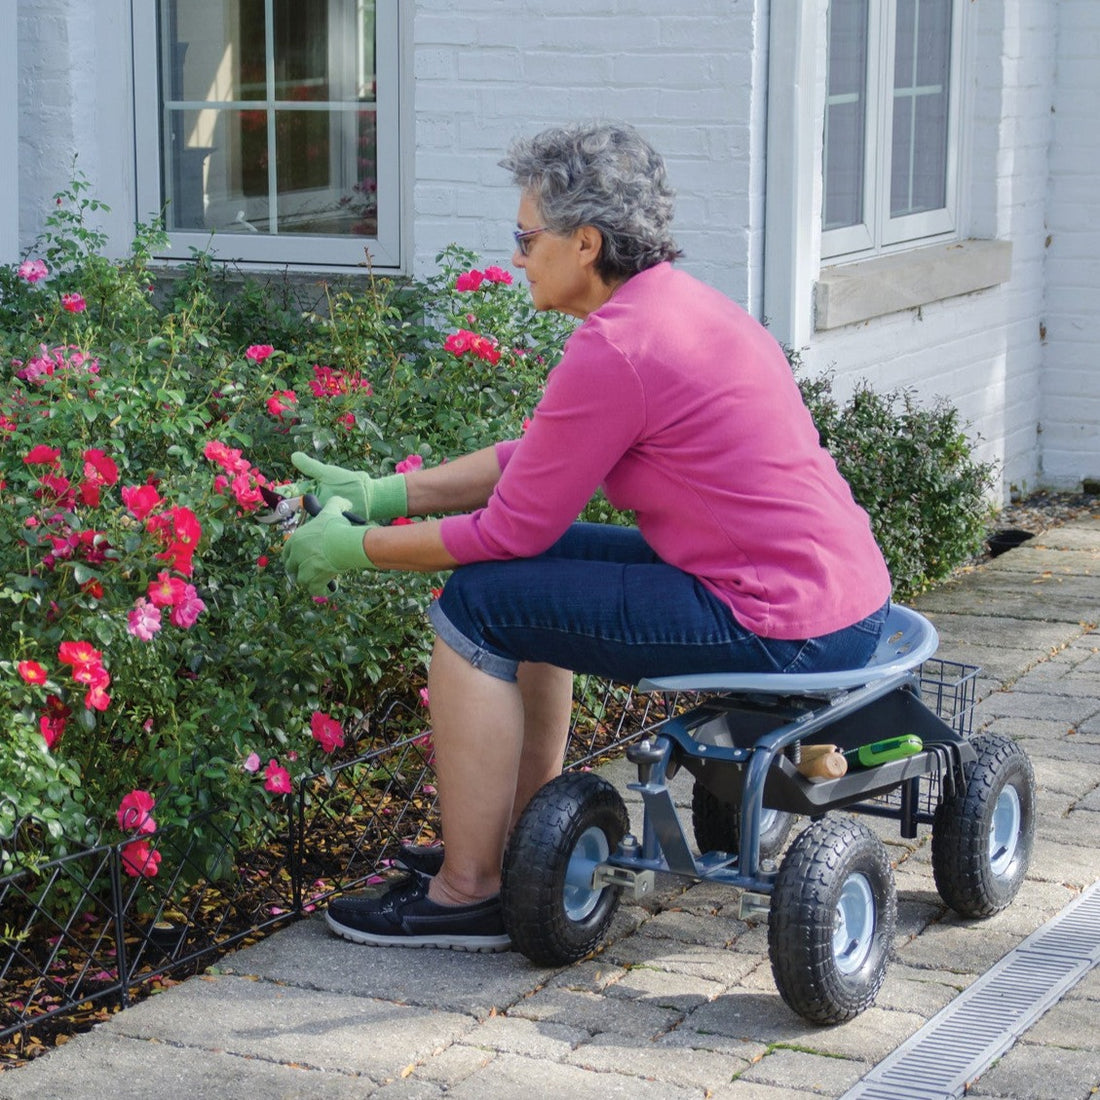 Scoot-N-Steer in use by woman pruning rose bushes